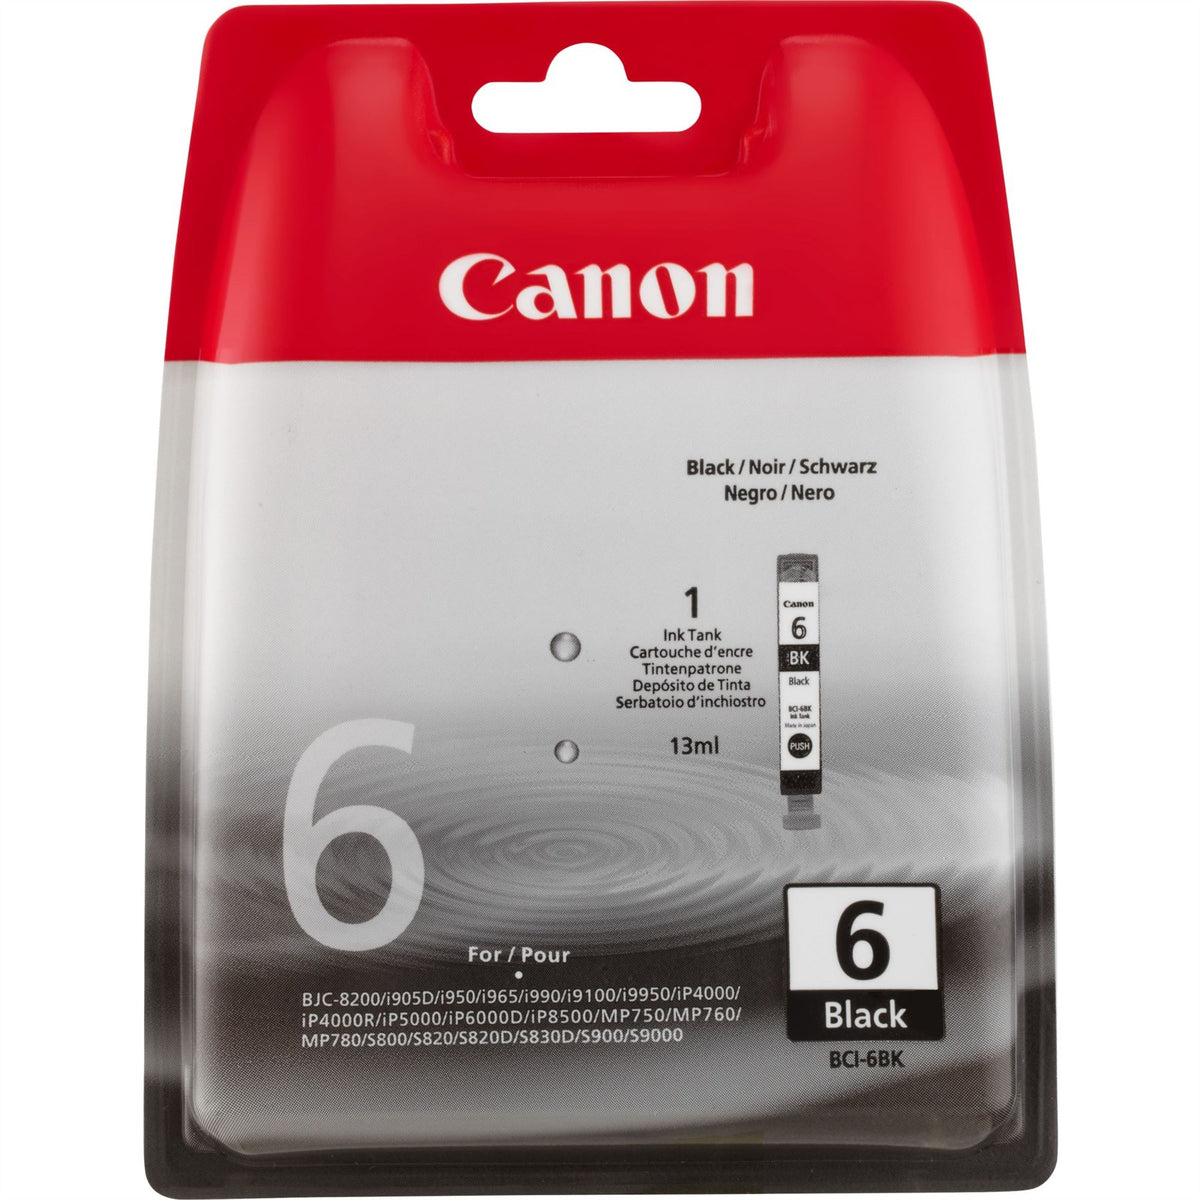 Canon 4705A002/BCI-6BK Ink cartridge black, 210 pages ISO/IEC 24711 13ml for Canon BJC 8200/I 865/I 990/I 9900/S 800